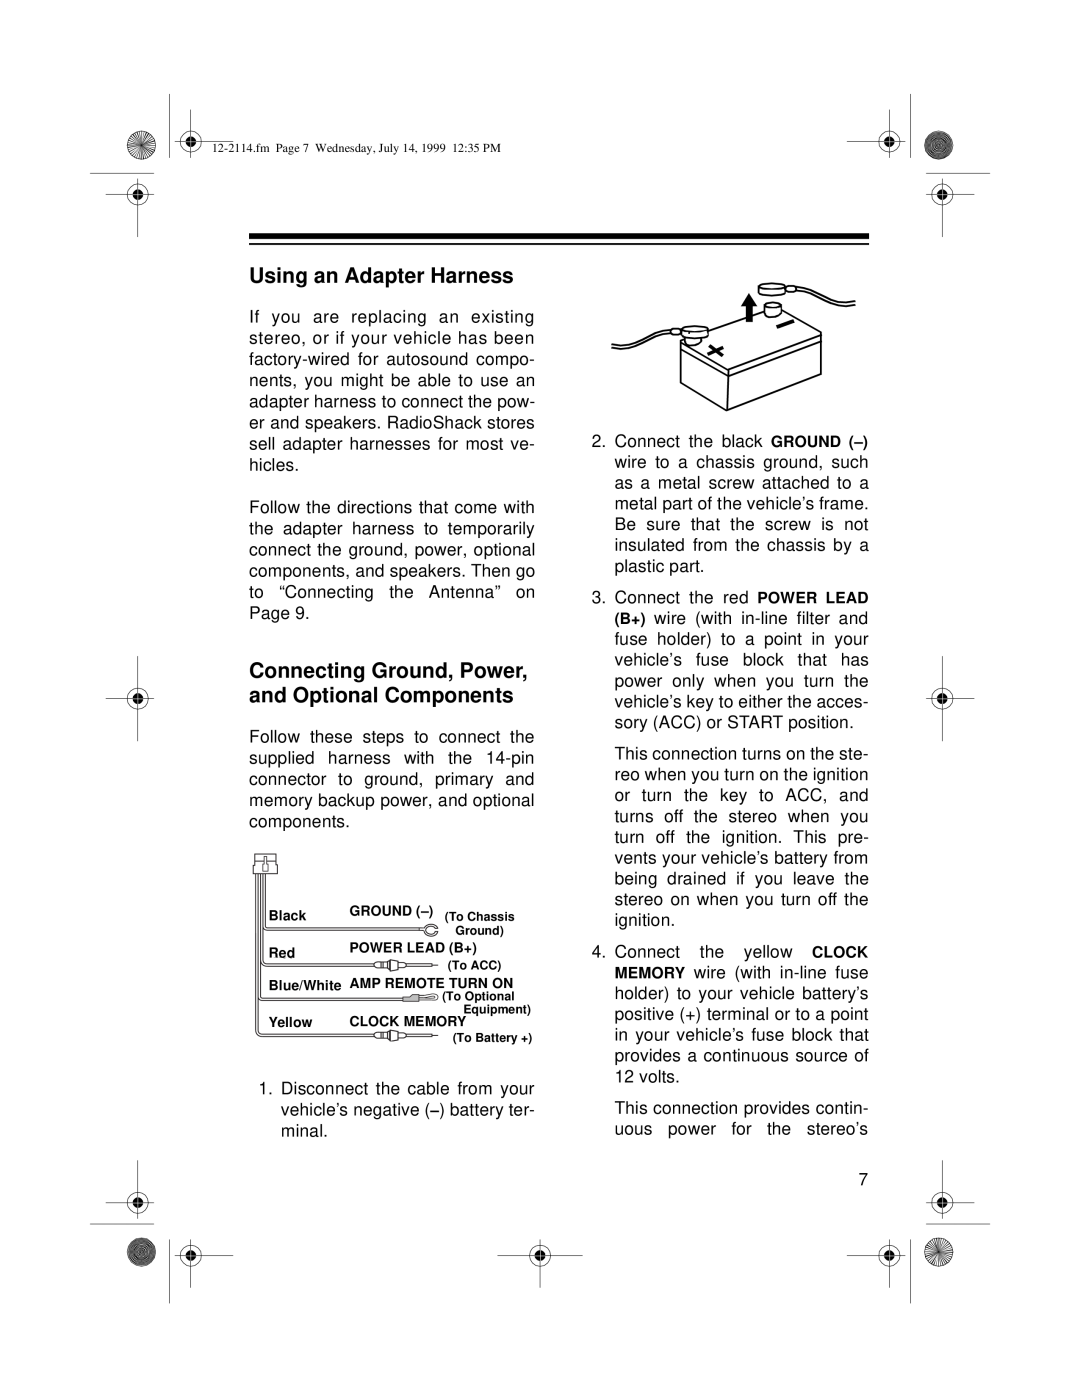 Optimus 12-2114, 4301-3838-0 owner manual Using an Adapter Harness, Connecting Ground, Power, and Optional Components 